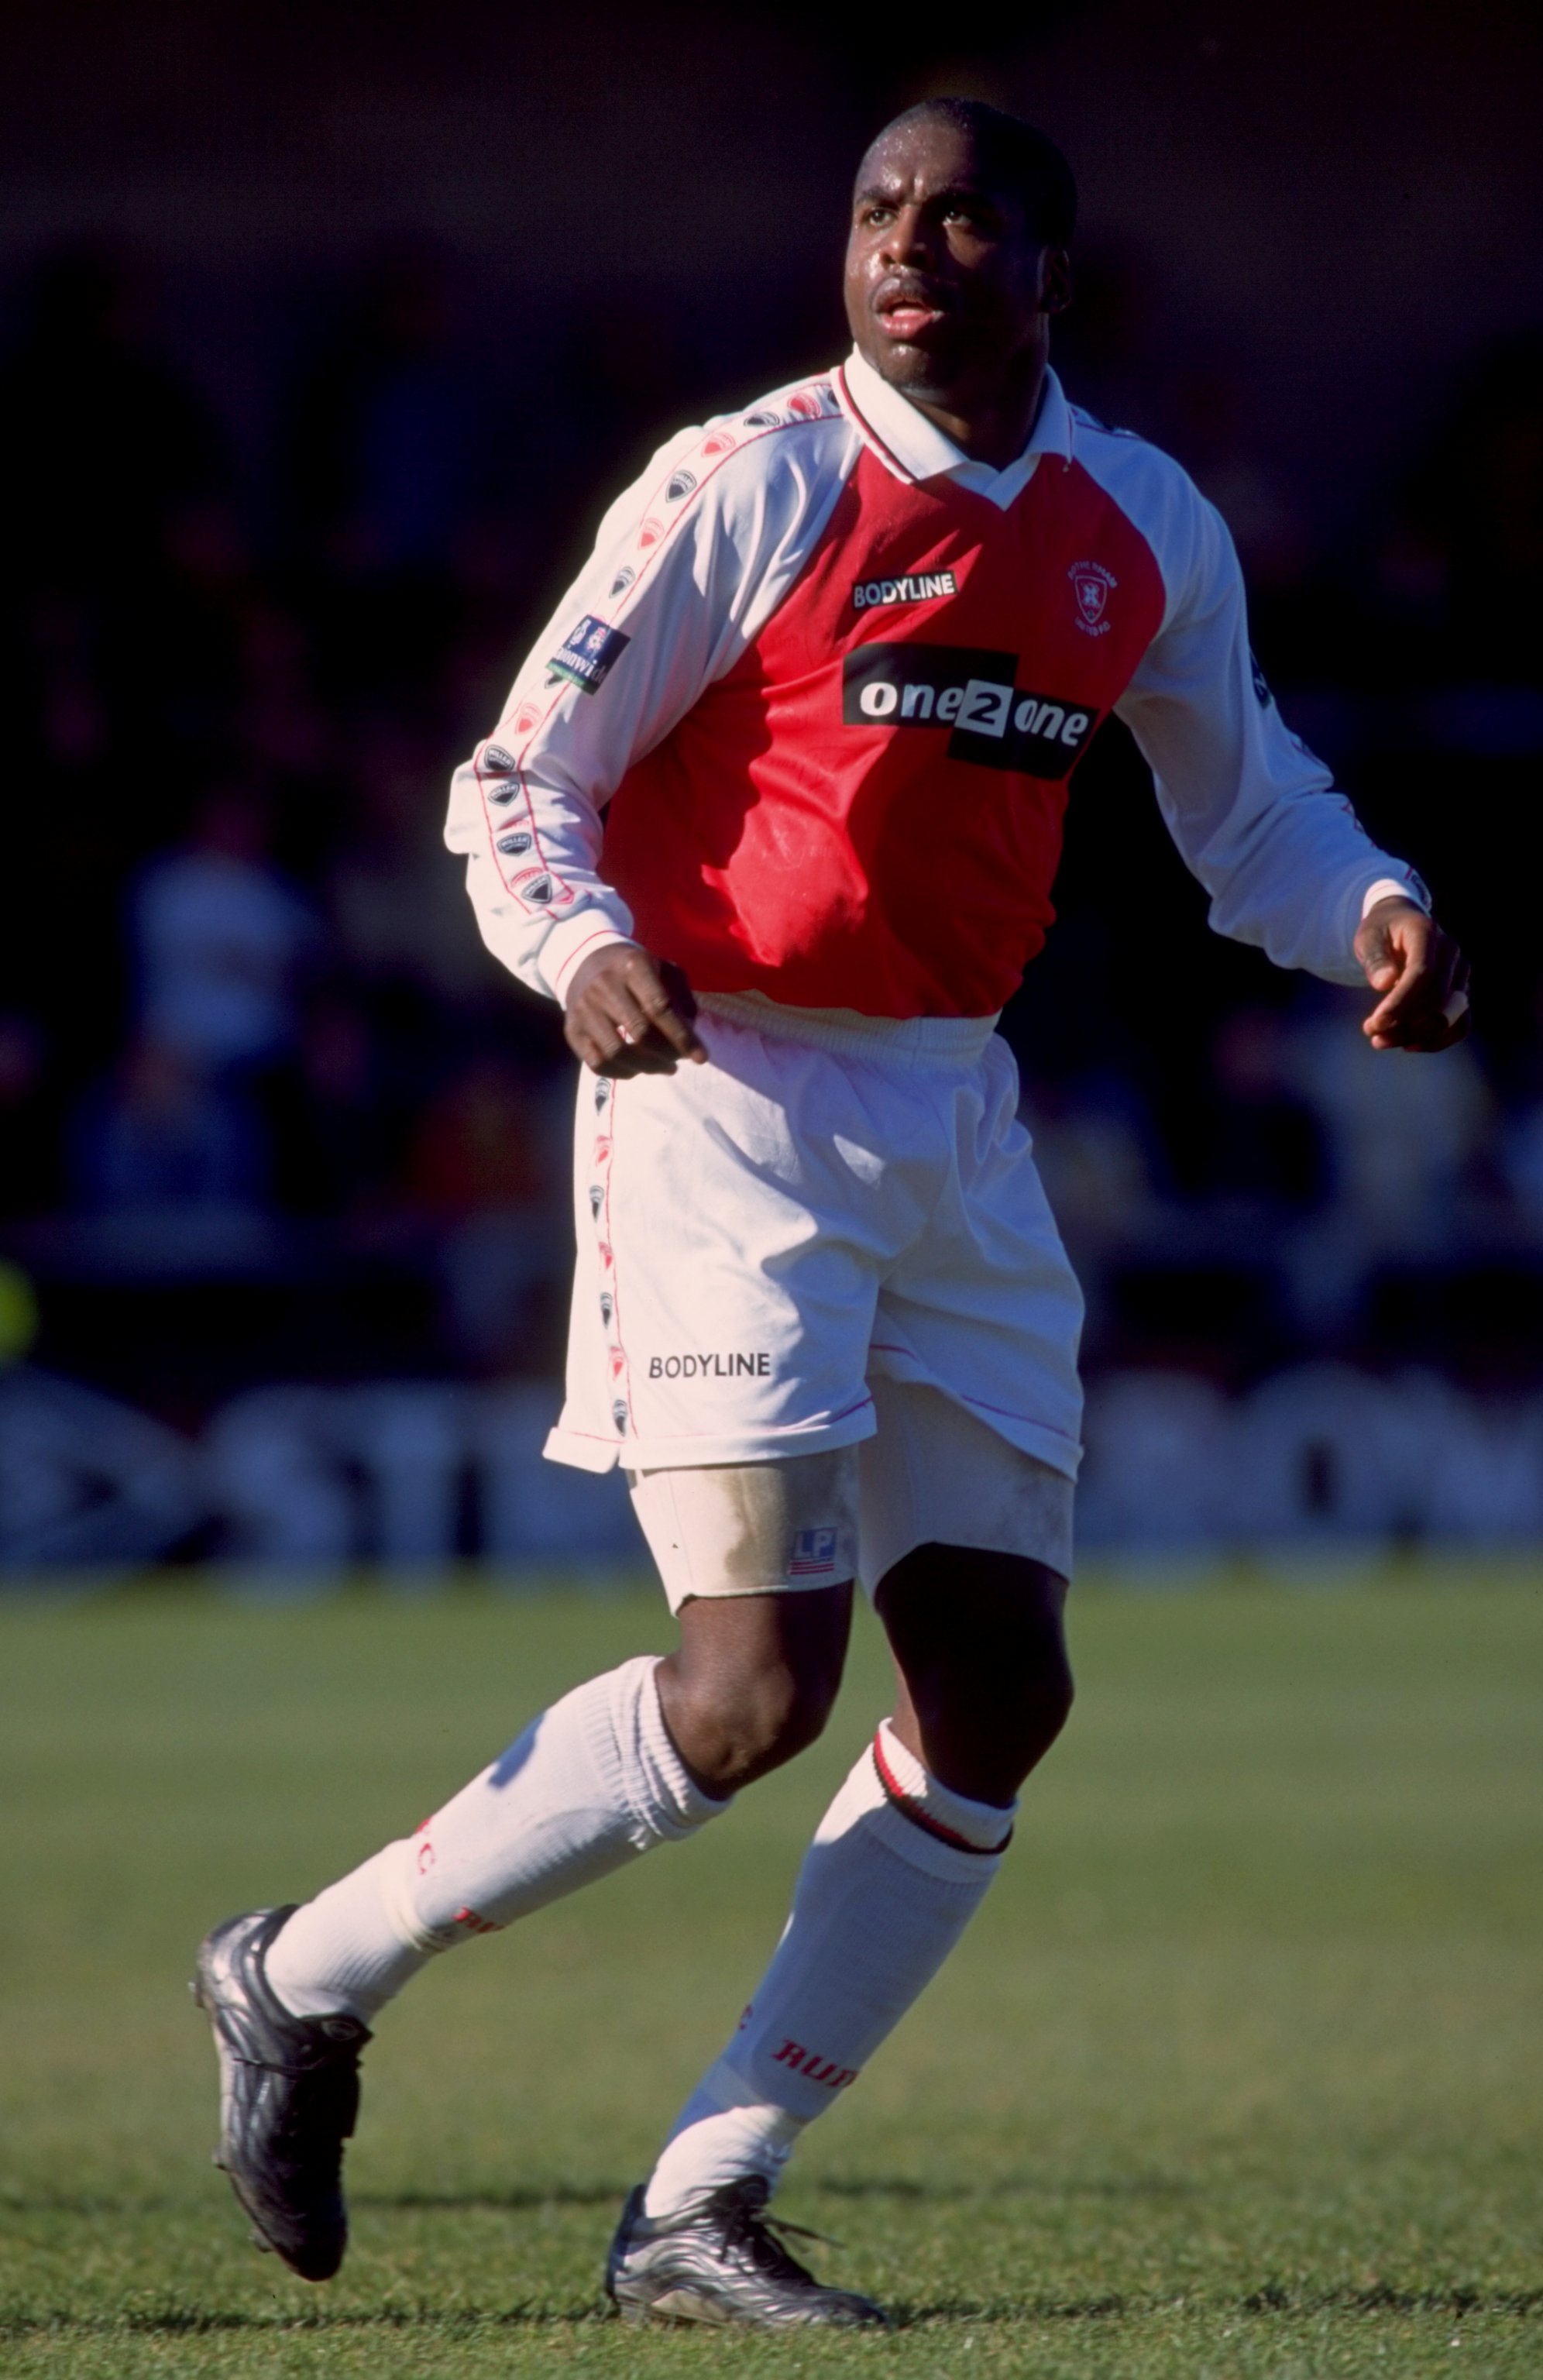 Warner played in the Premier League and was an England youth international before retiring through injury